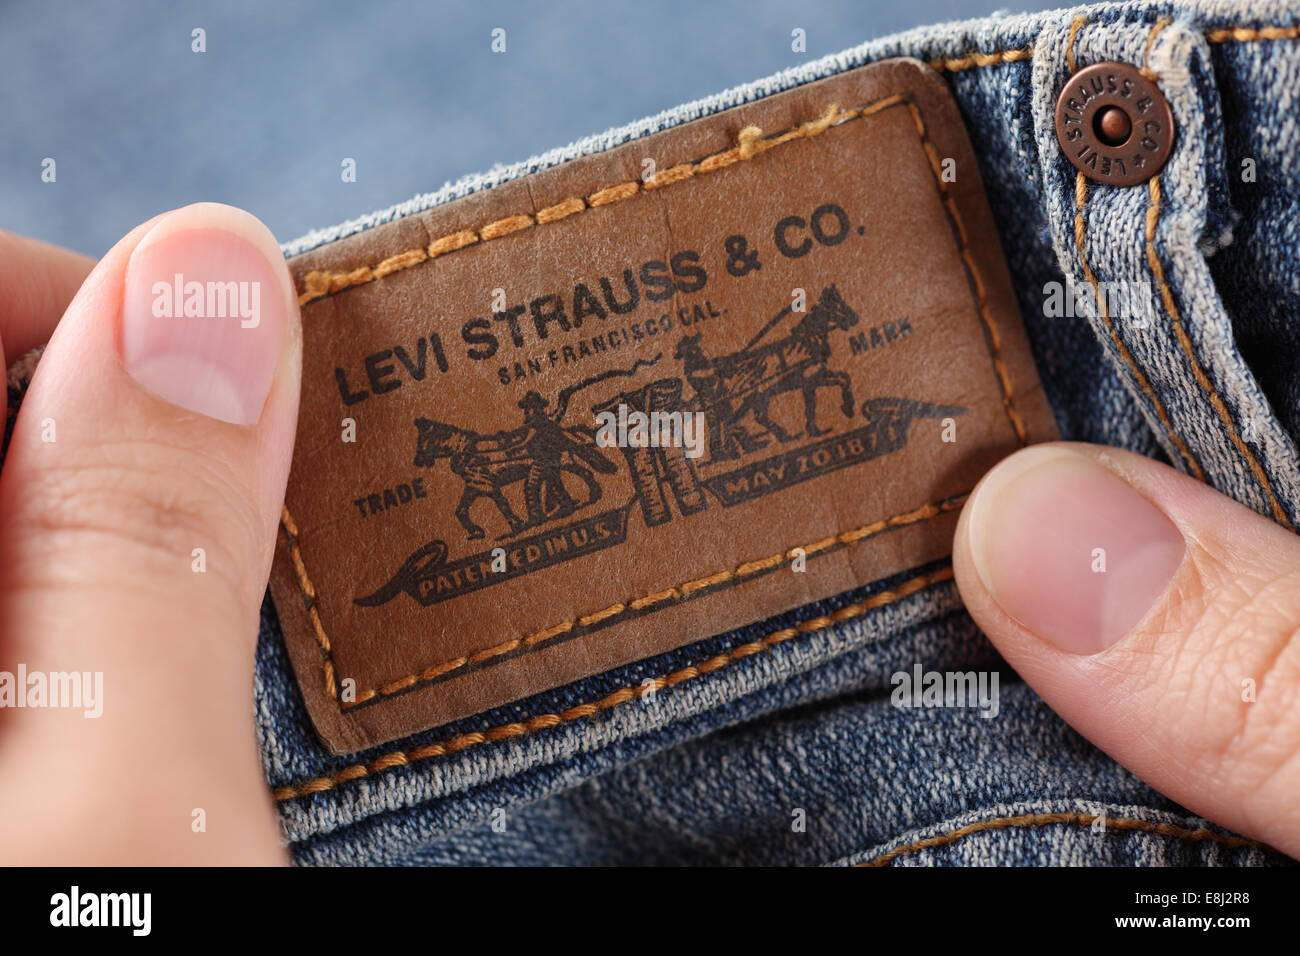 Levi Jeans Logo High Resolution Stock Photography and Images - Alamy